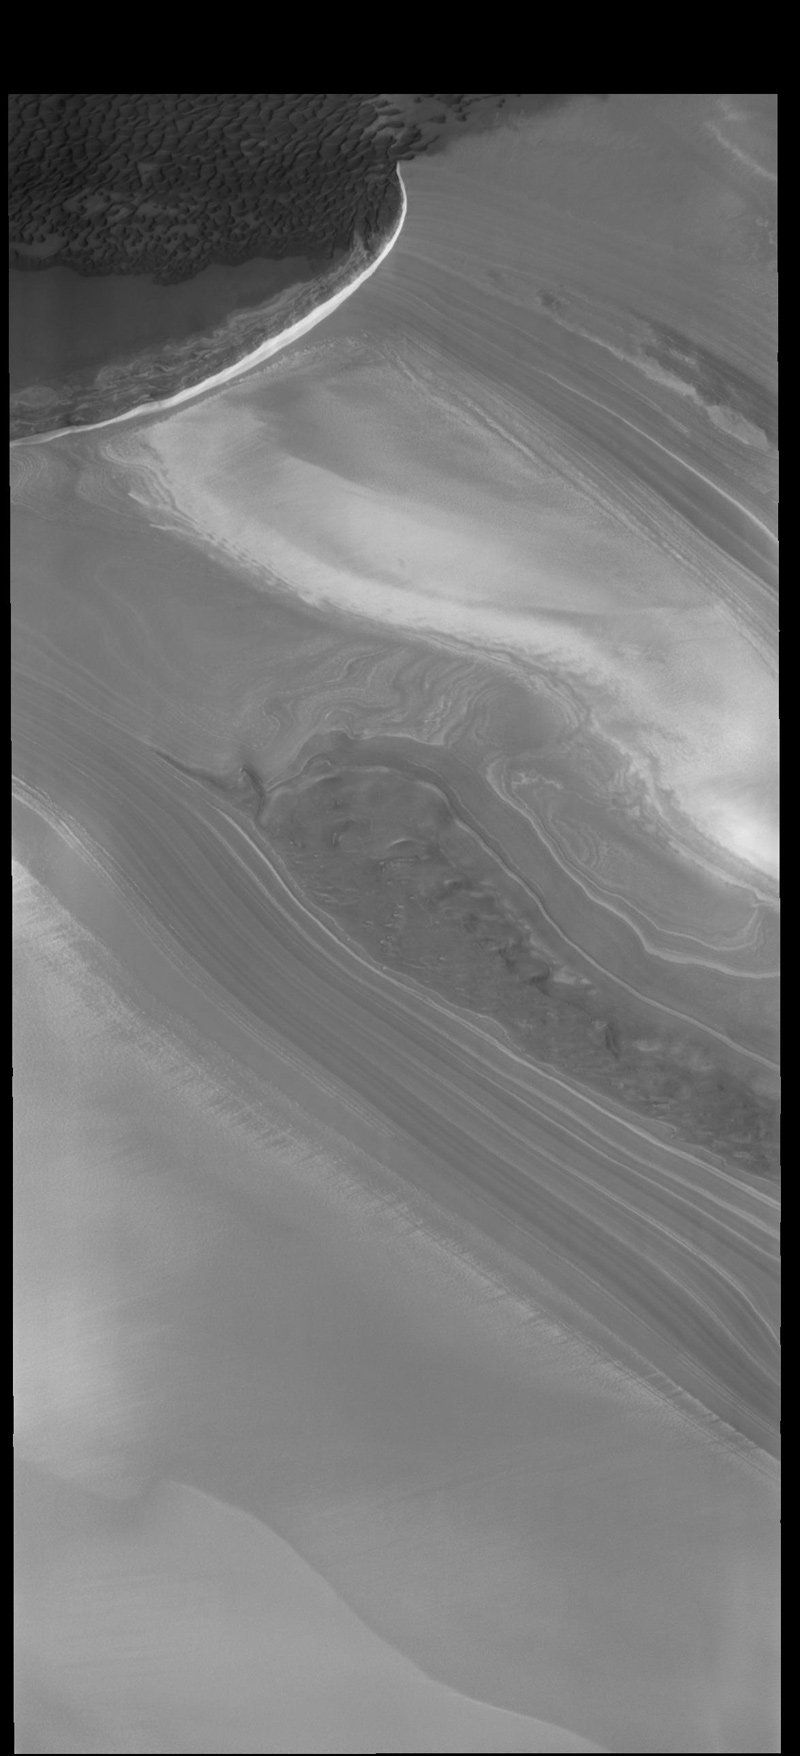 This image from NASA's 2001 Mars Odyssey spacecraft shows part of the margin of the north polar cap and the surrounding plains. The layering of the ice is easily visible due to the dust that is deposited on the top of the ice every year, creating layering over millions of years.